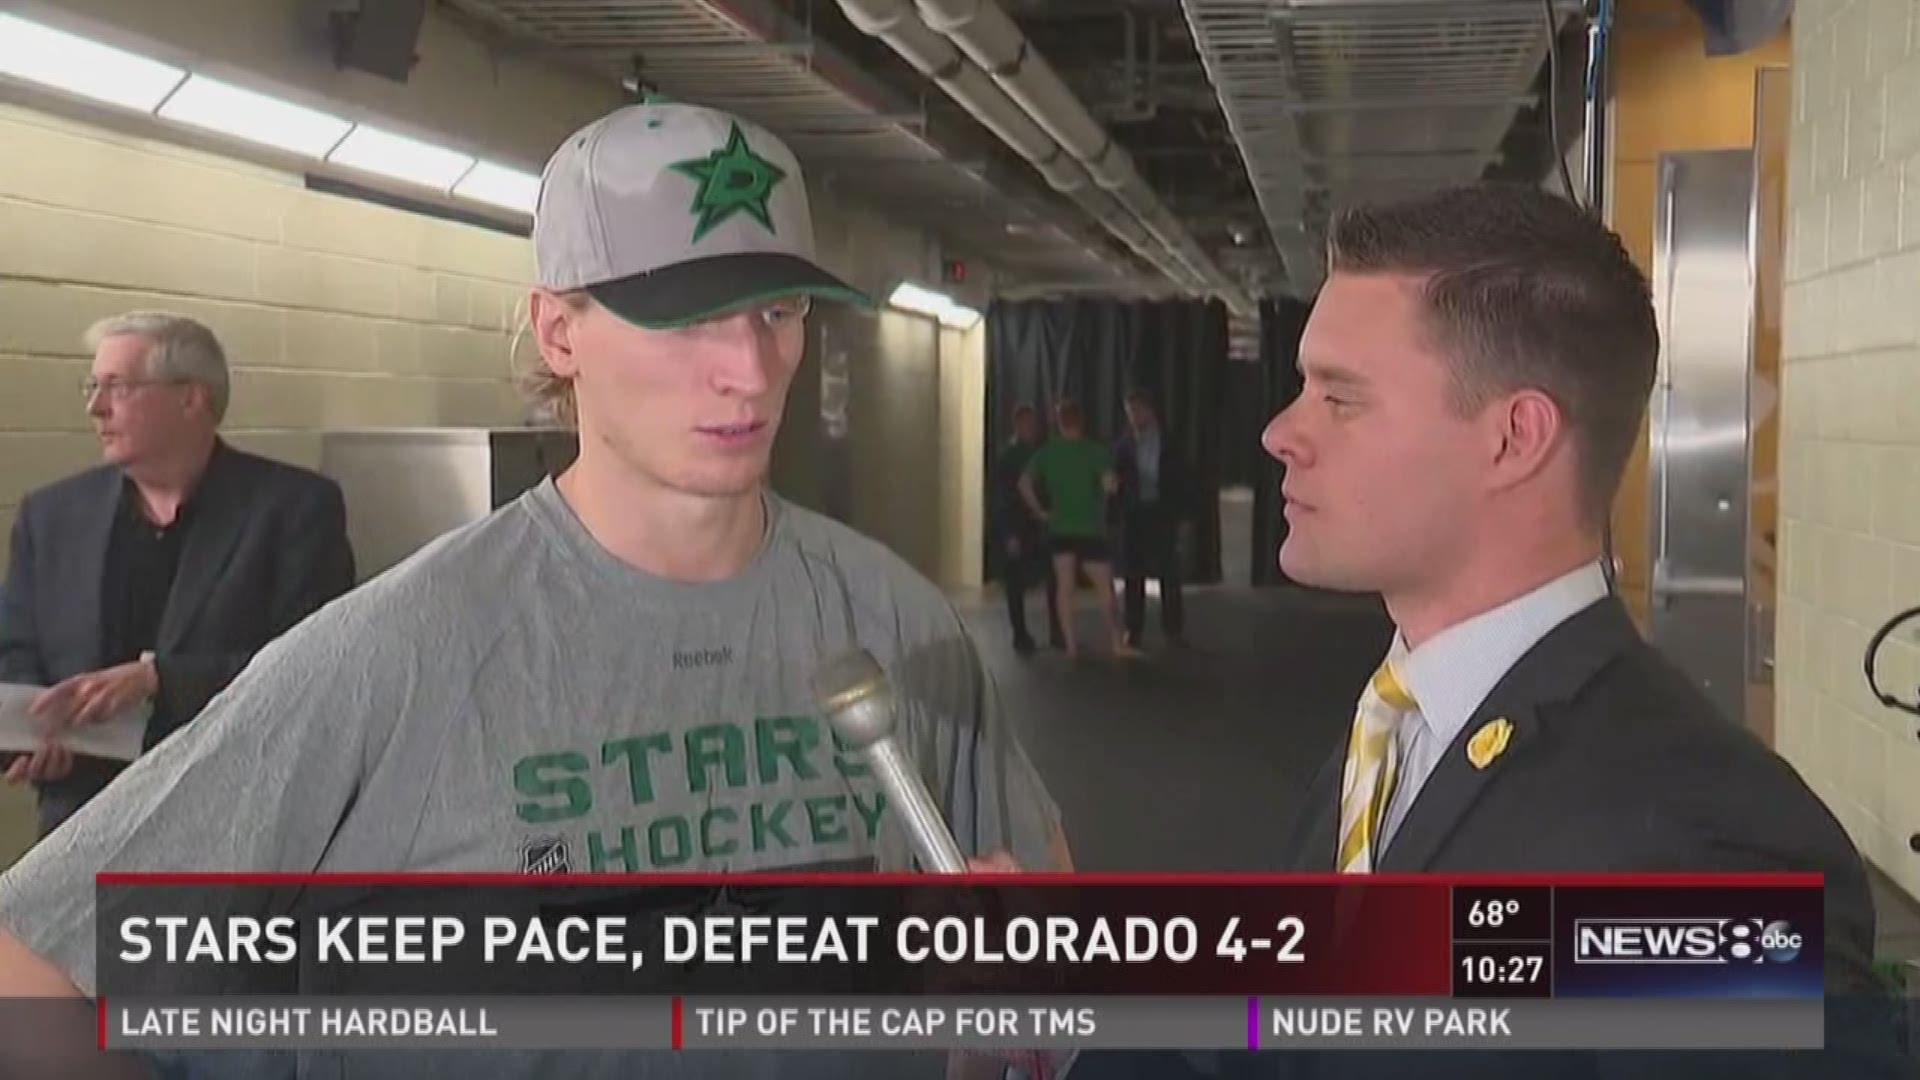 The Dallas Stars were close to locking up a division title Thursday night, but they'll have to wait a little longer after the St. Louis Blues won in overtime. WFAA Sports' Mike Leslie talked to defenseman John Klingberg about the final days of the regular